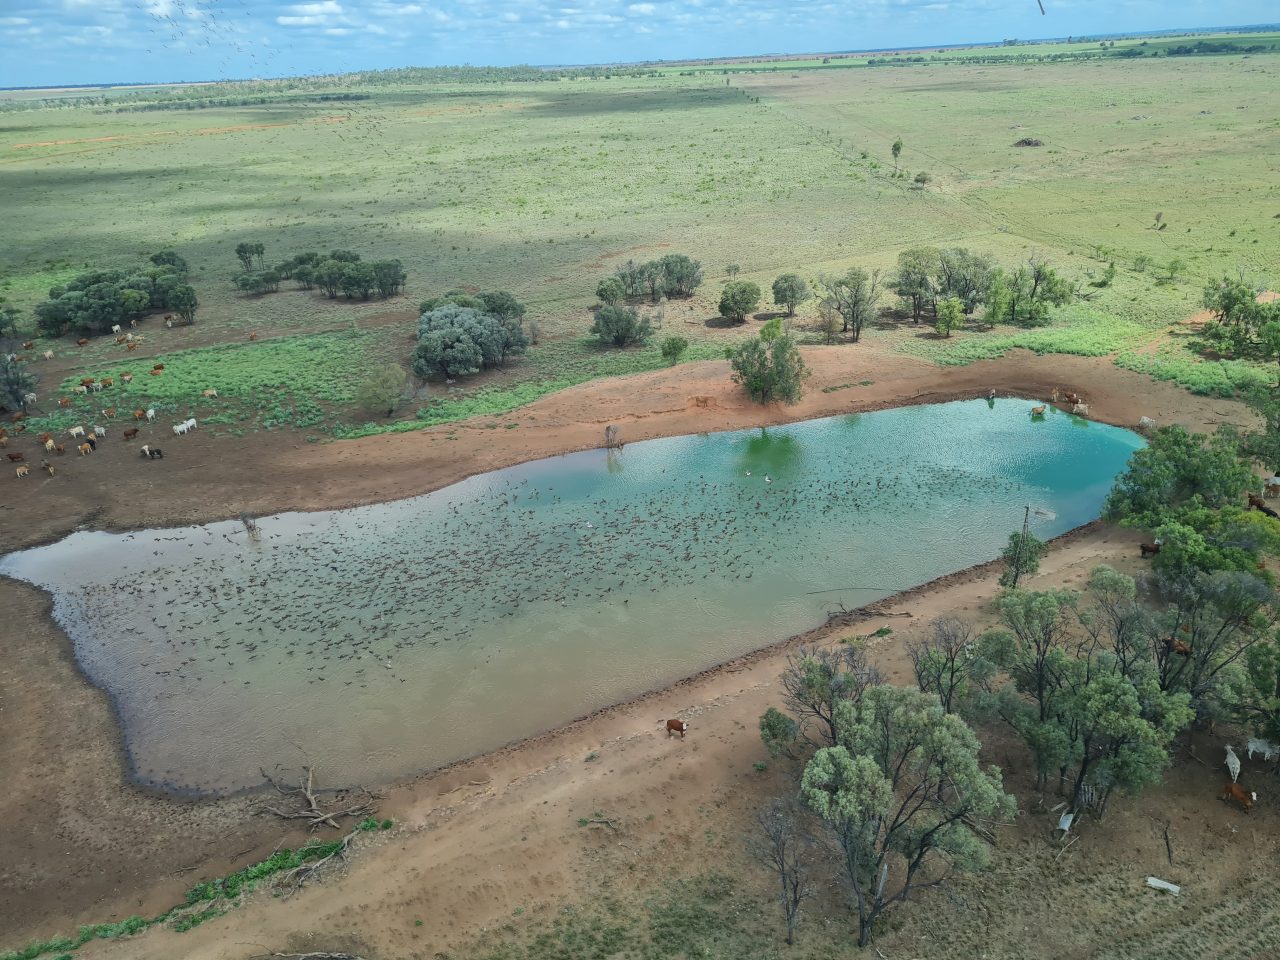 Aerial photo of around 1000 whistling ducks on and around the water of a rectangle shaped farm dam with light green water and dark orange soil surrounding it. The plain extenda to the horizon and is covered in green ground cover vegetation. There are cattle close by the dam